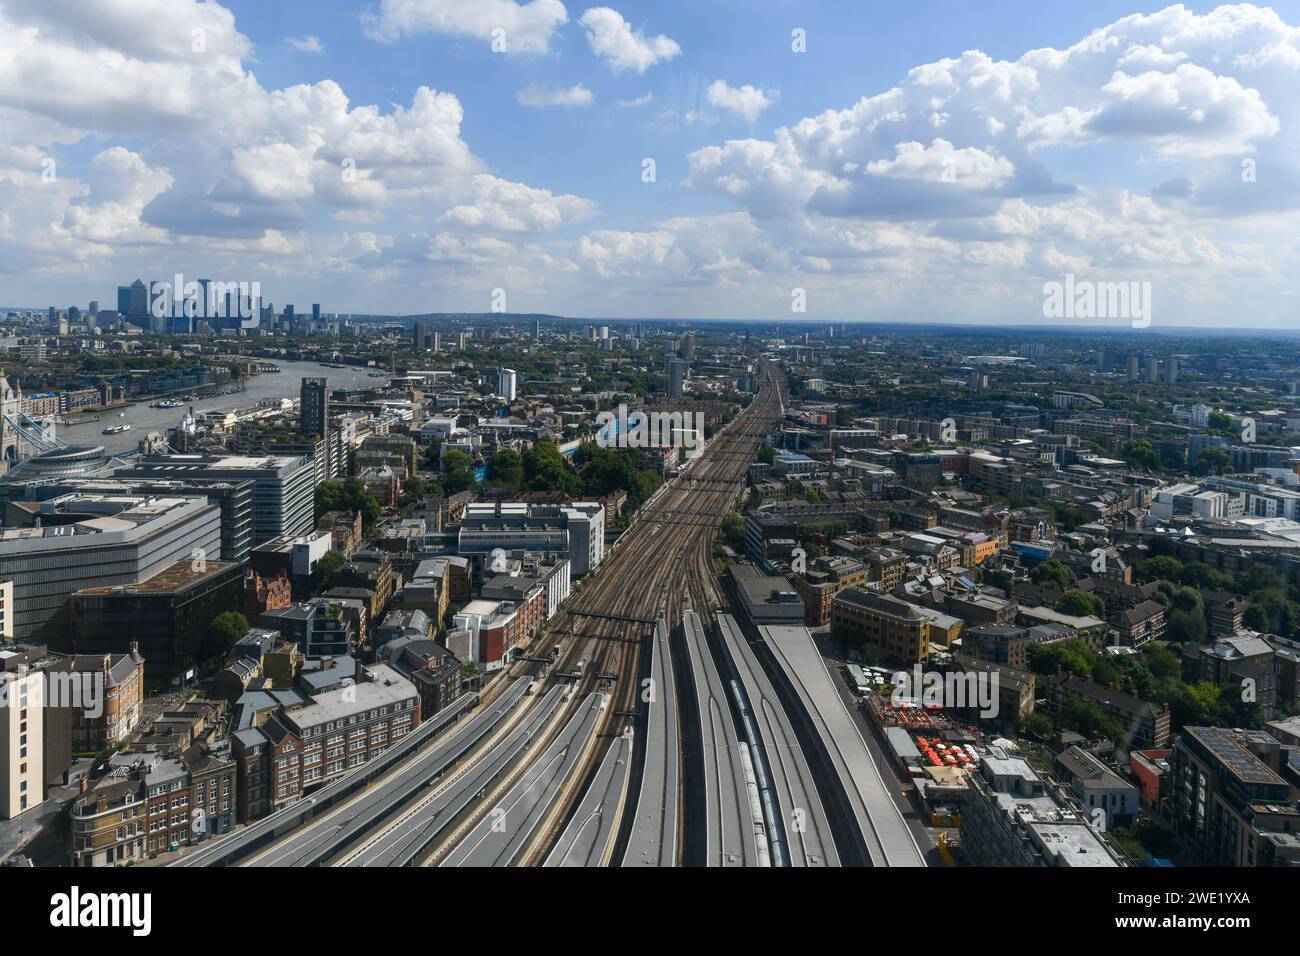 Aerial view of train tracks entering Waterloo Station in London, UK. Stock Photo